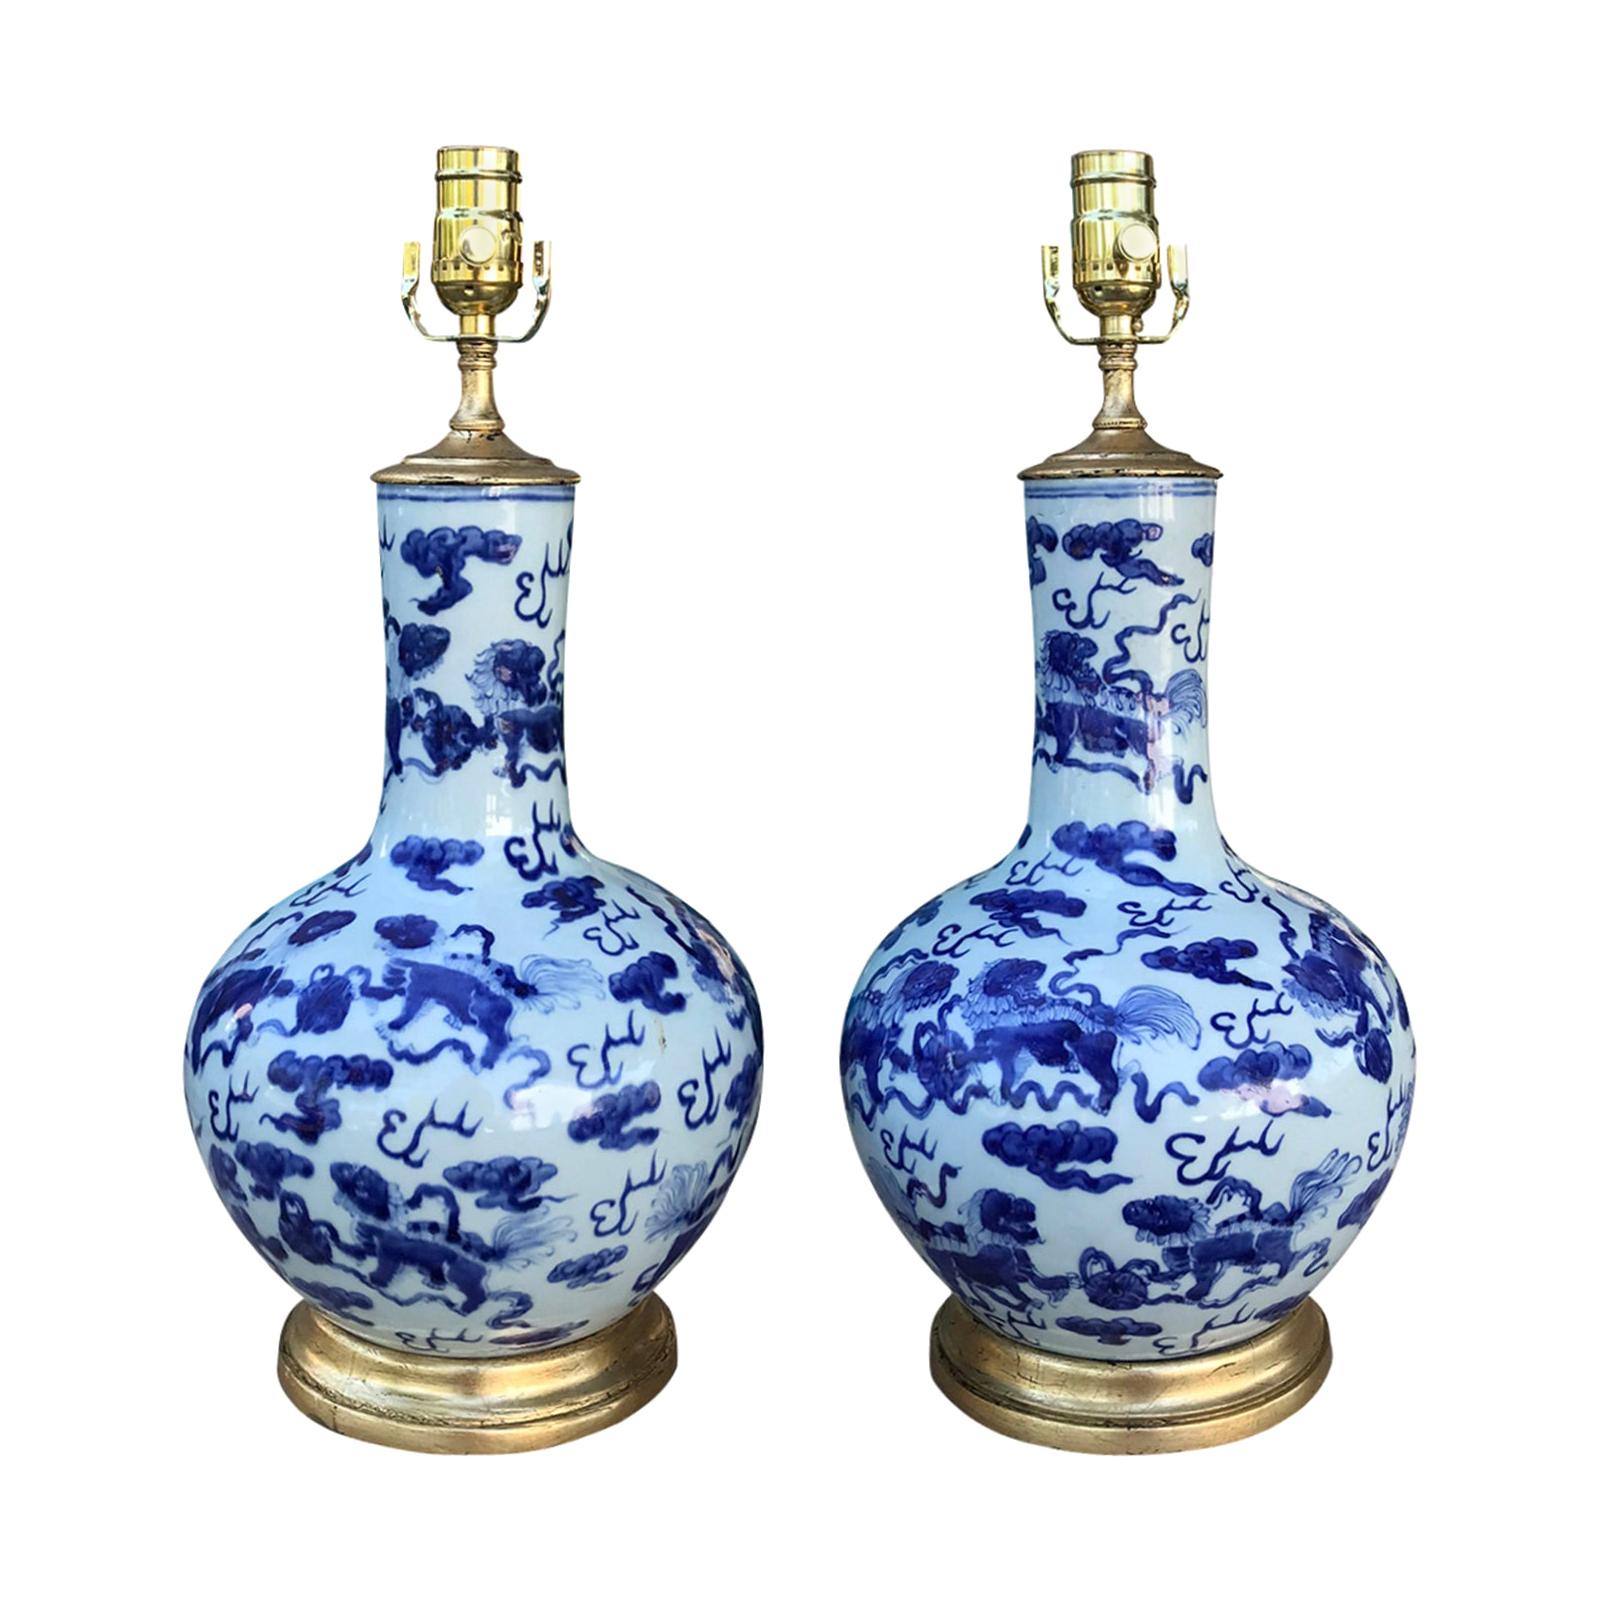 Pair of 19th Century Chinese Blue and White Porcelain Vases as Lamps